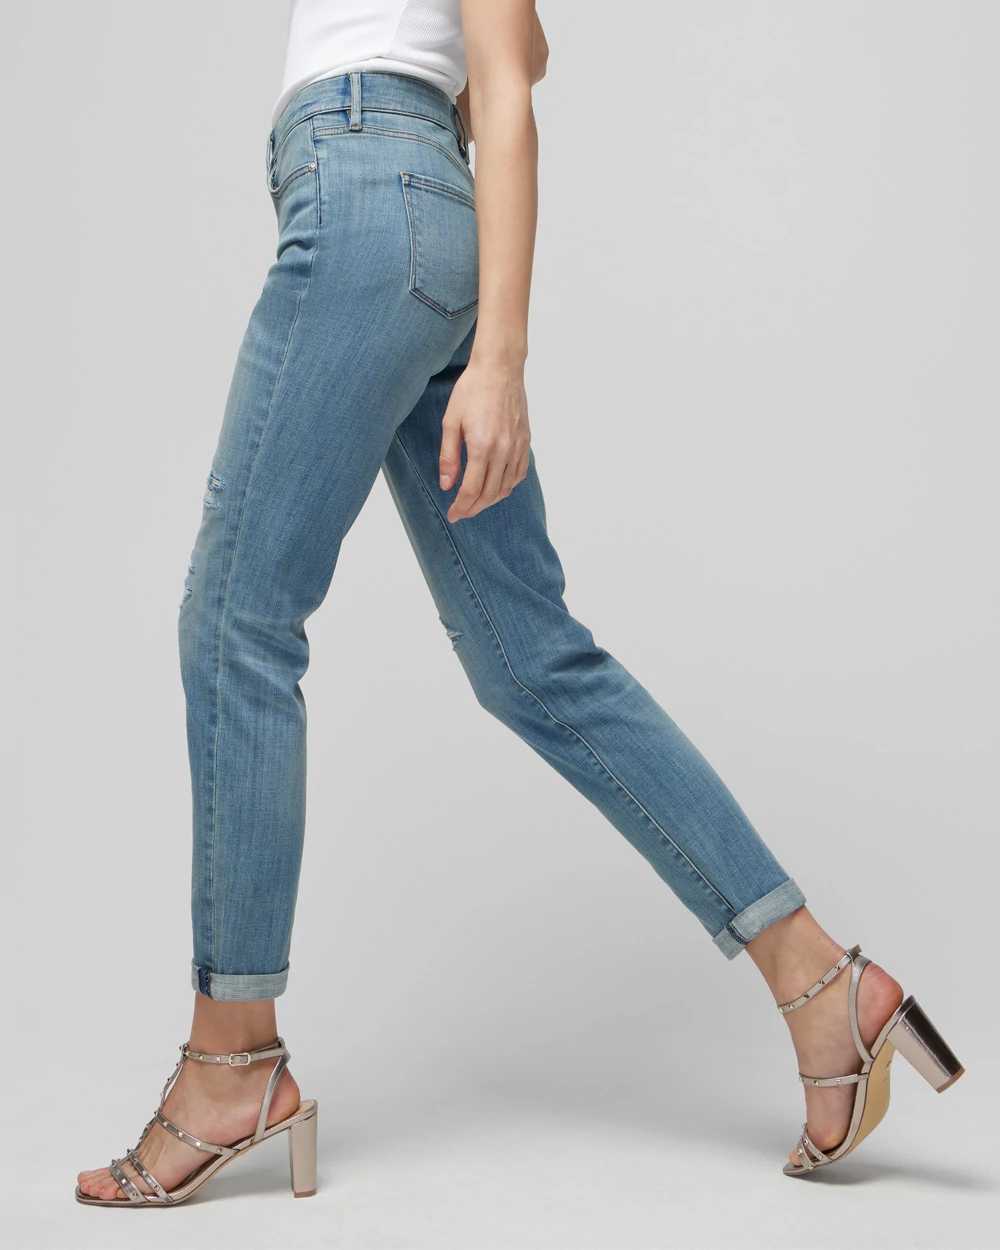 Mid Rise Everyday Soft Denim  Destructed Girlfriend Jeans click to view larger image.